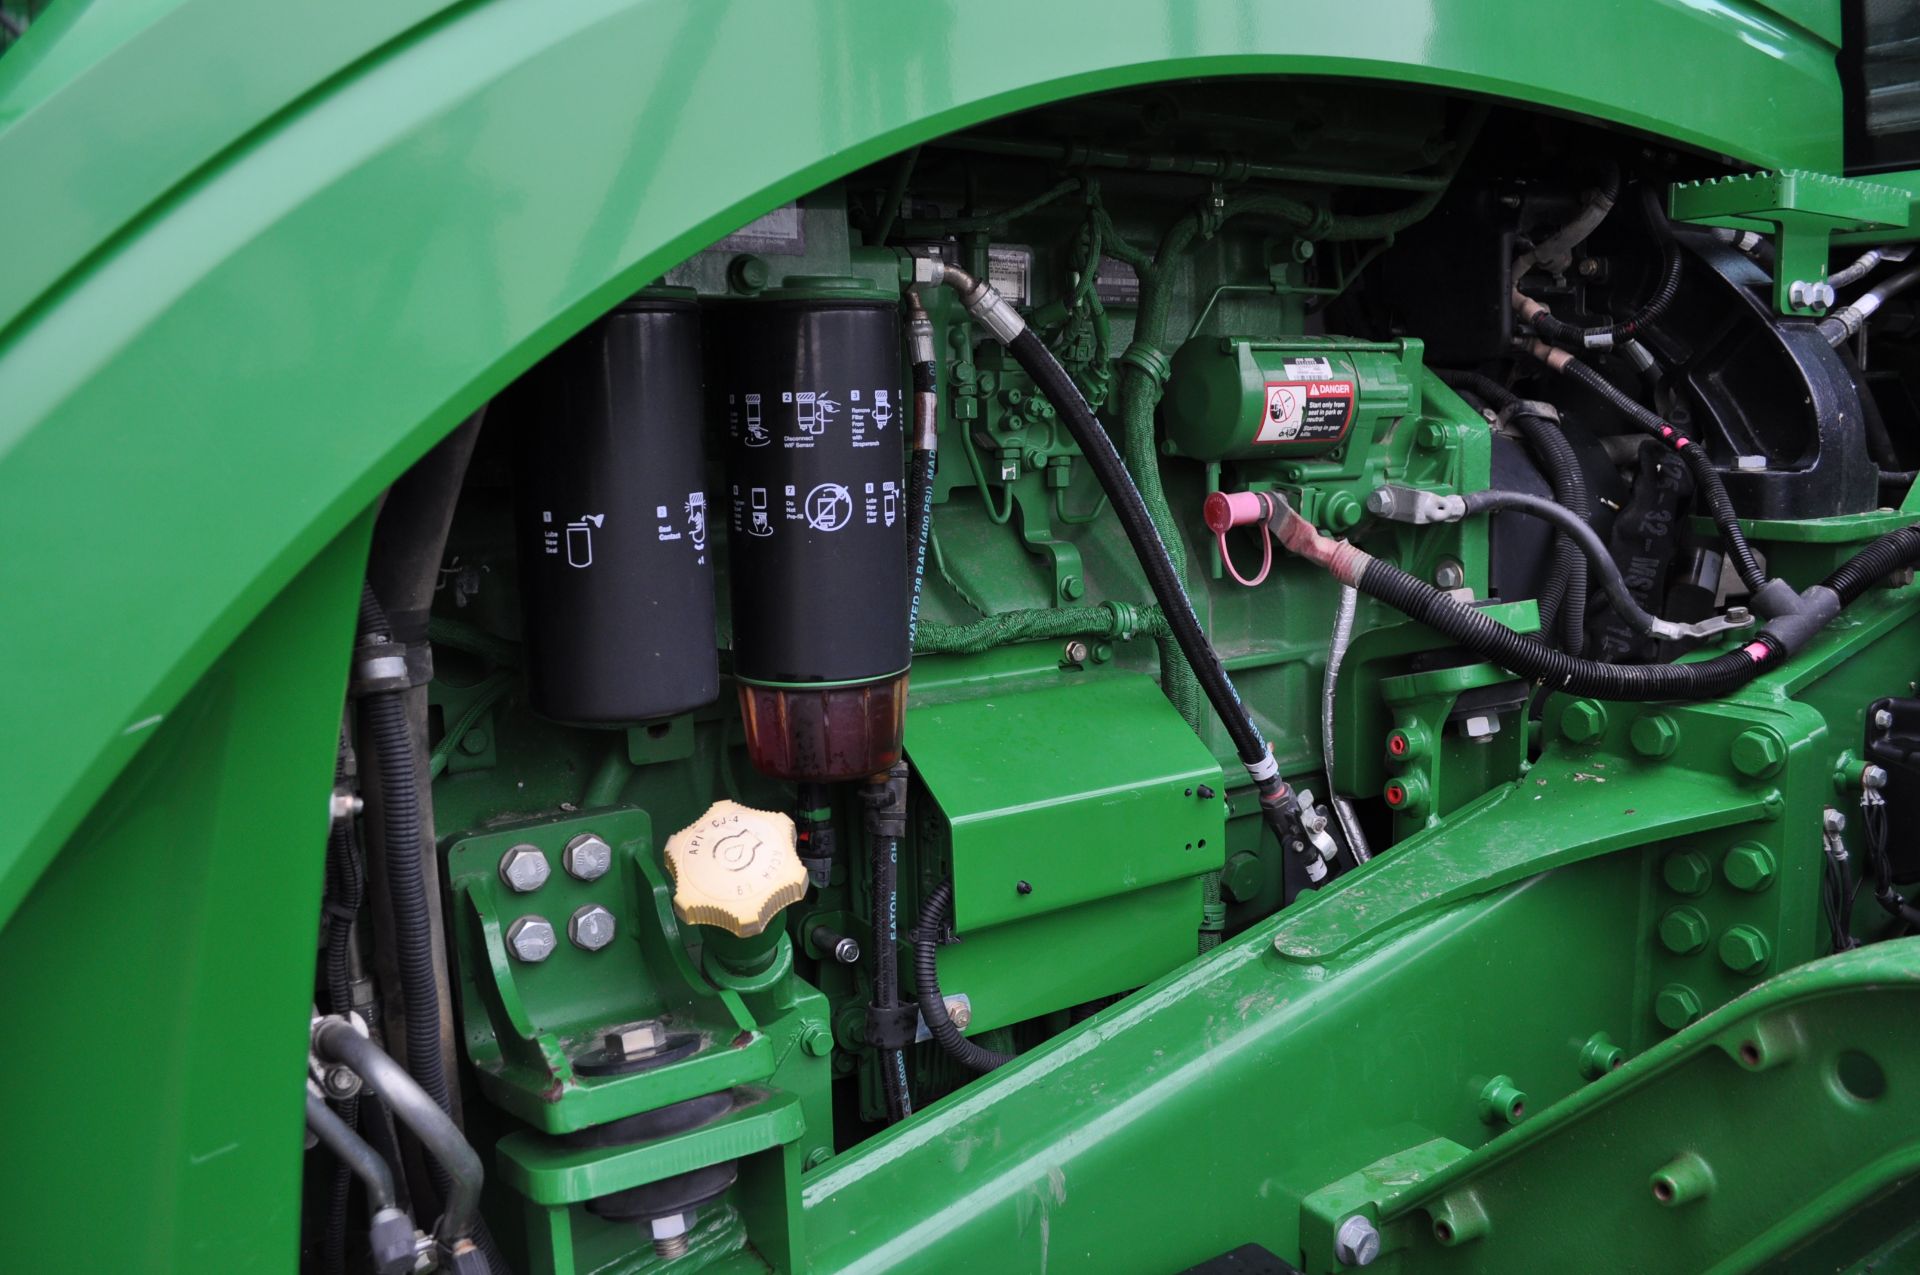 John Deere 9510RT track tractor, 36” belts, front weights, Powershift, 6 hyd remotes, 1000 PTO - Image 29 of 37